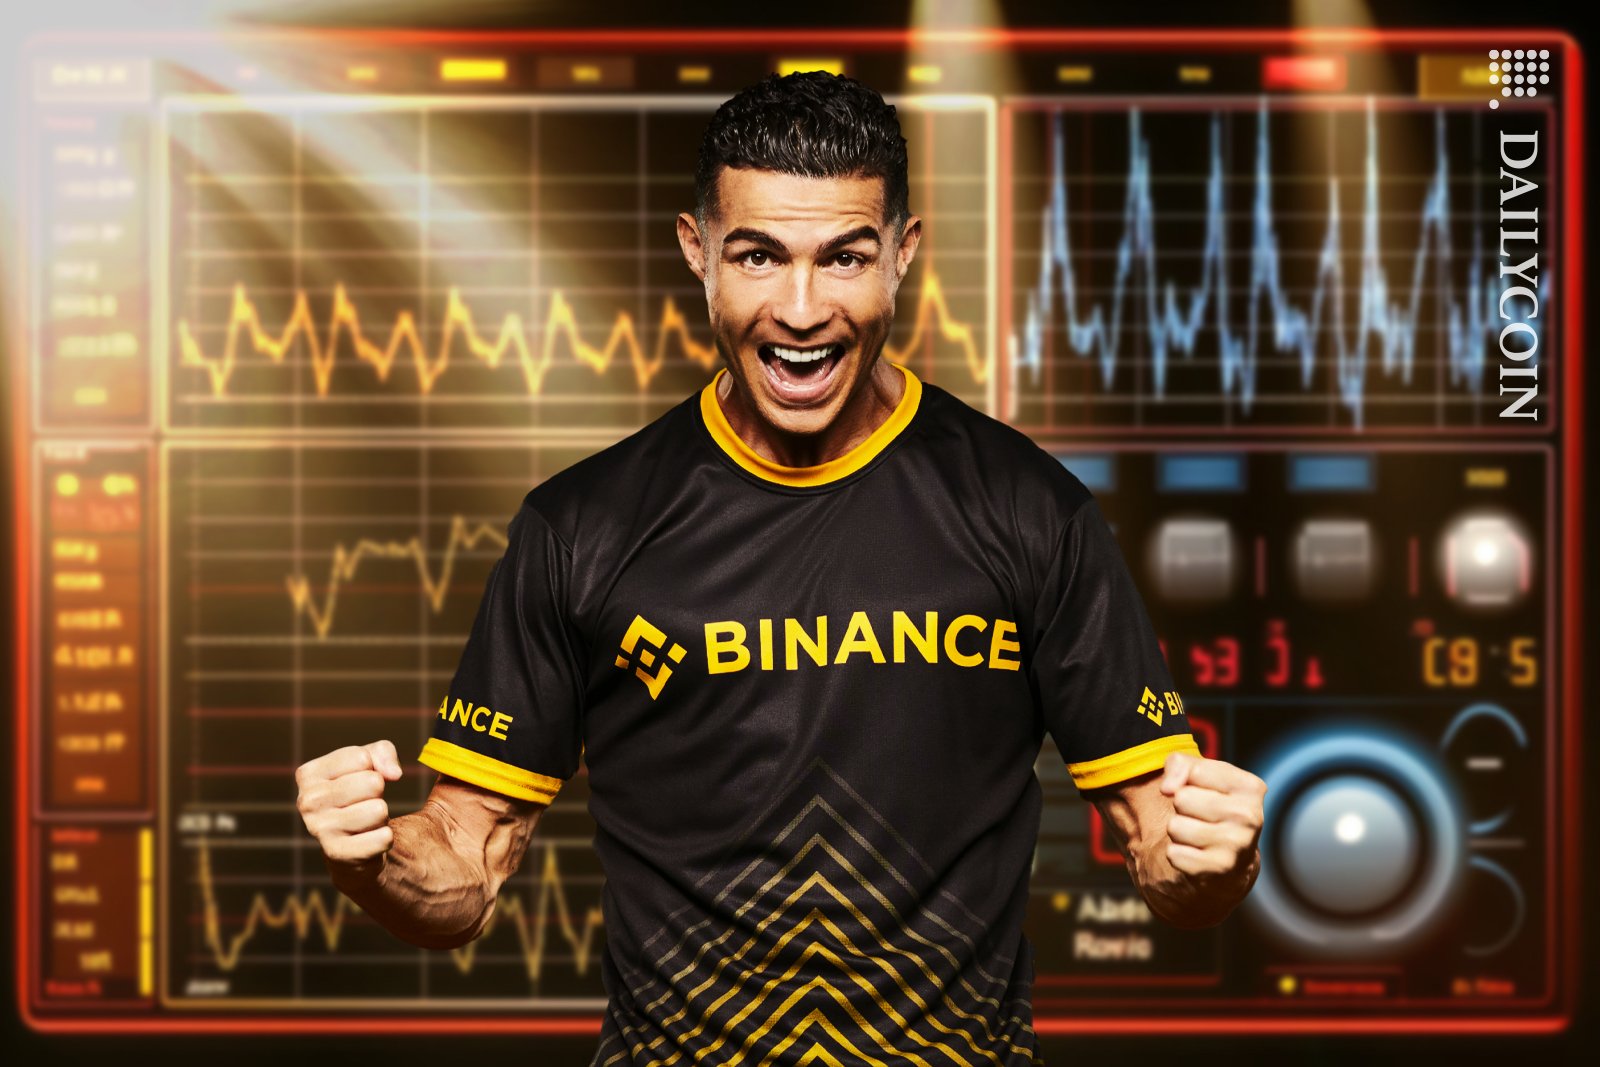 Christiano Rolando about to take the Binance lie detector.